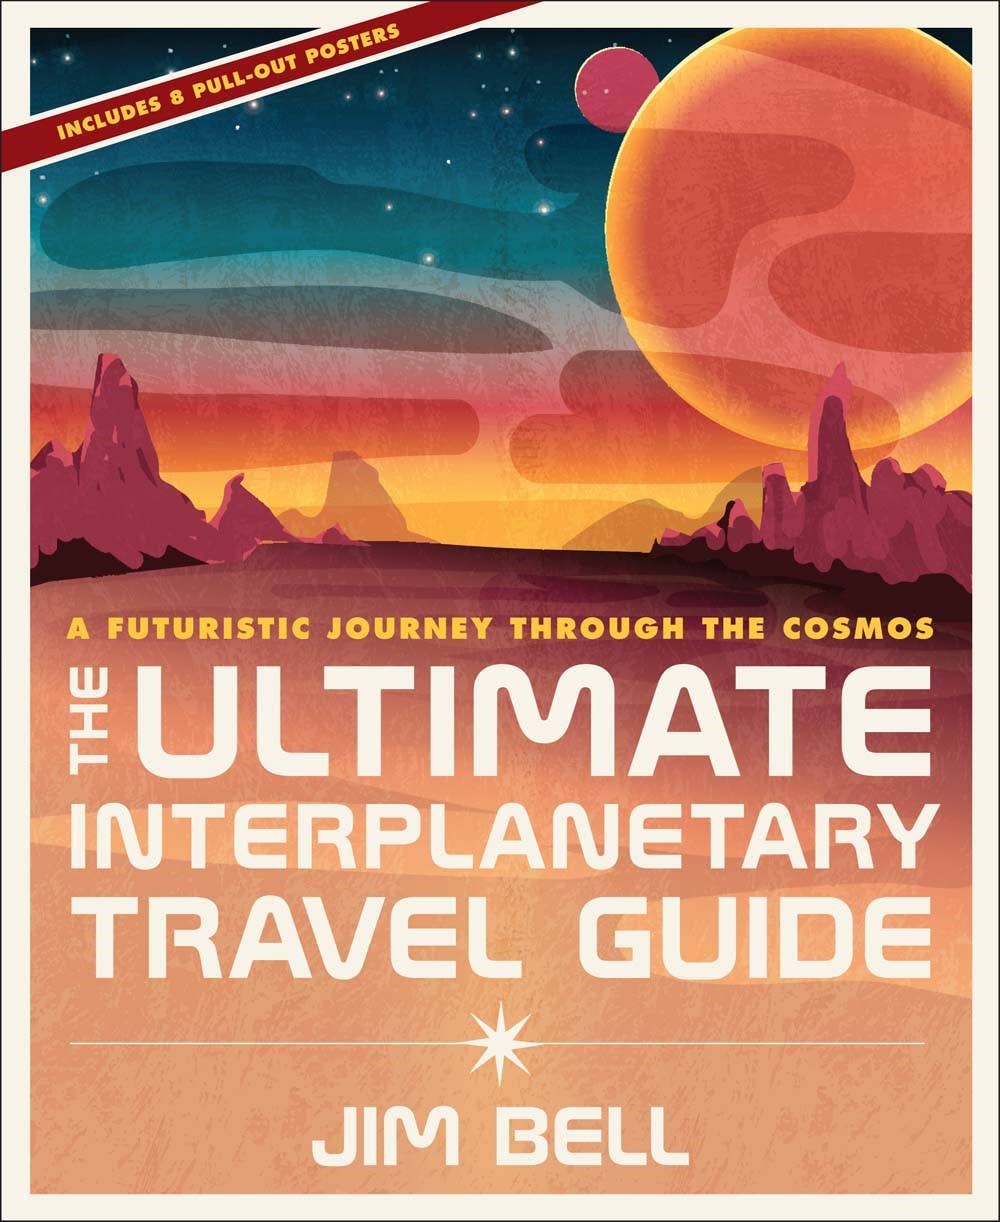 Interplanetary Travel Guide: Journey Through the Cosmos - Spiral Circle